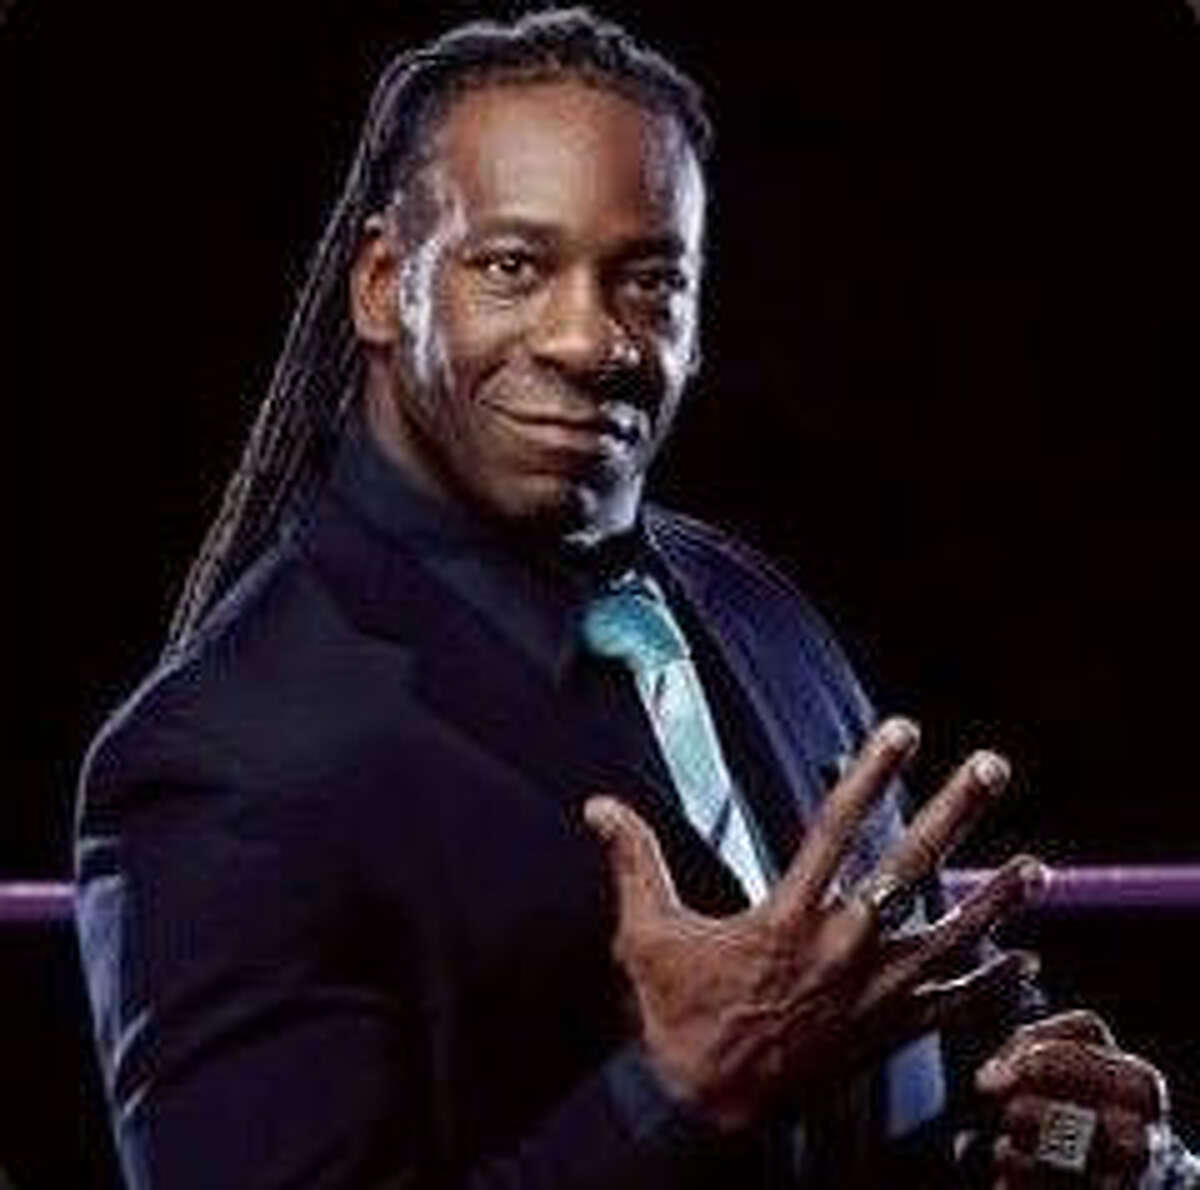 WWE Hall of Fame wrestler Booker T. announced he's running for Mayor of Houston in 2020. Booker T. - real name Booker T. Huffman - announce on his radio show on Saturday that a mayoral bid is in the offing.